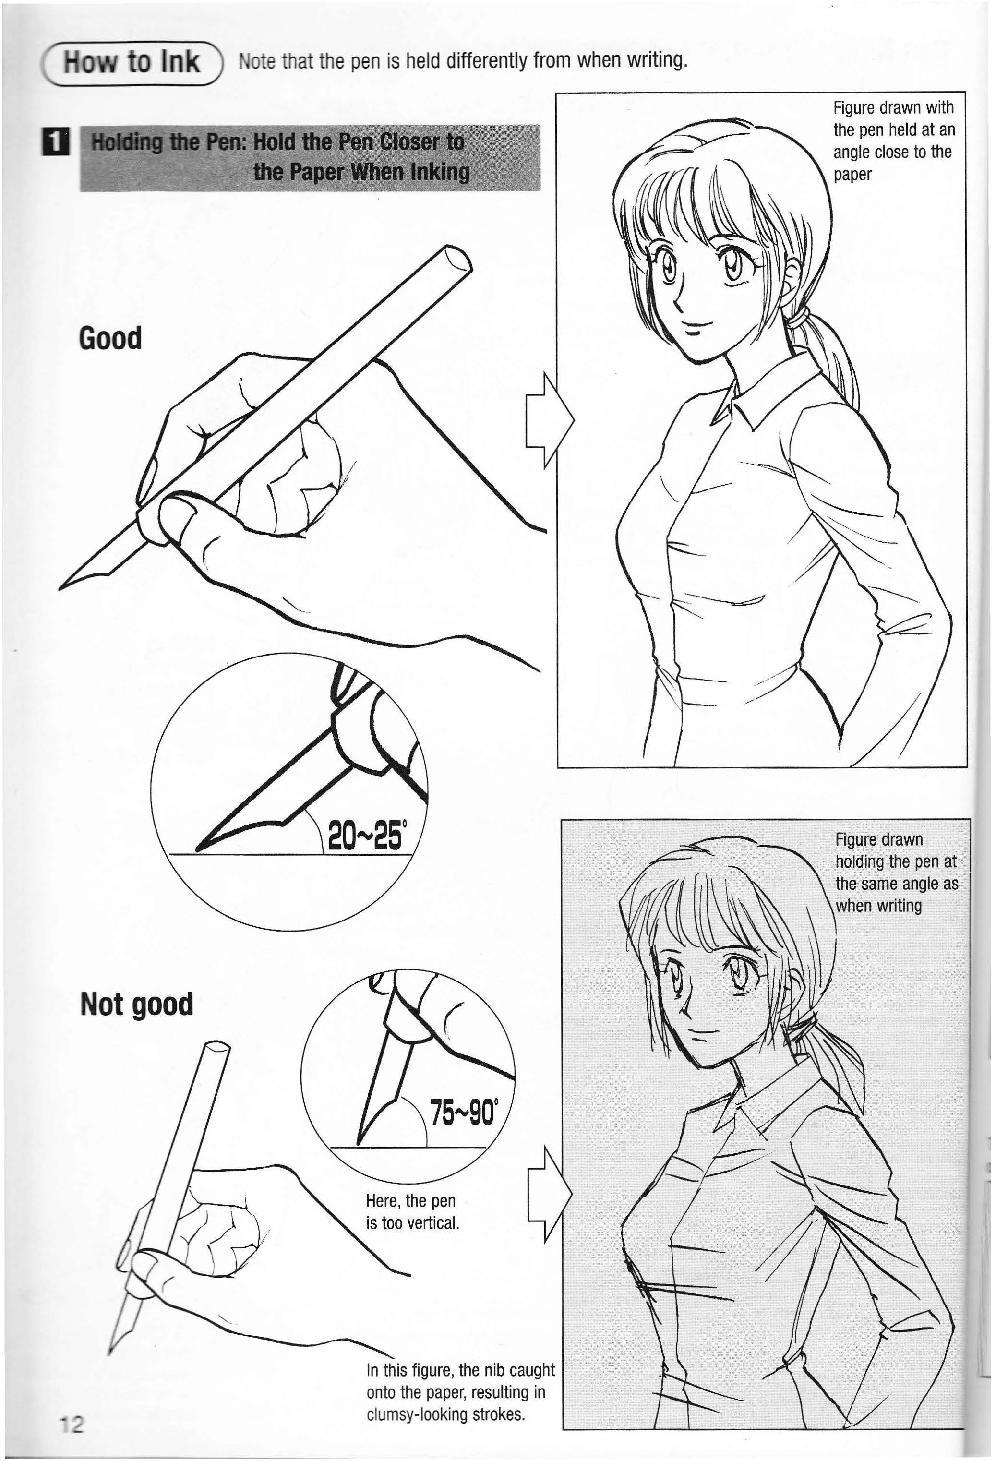 More How to Draw Manga Vol. 2 - Penning Characters 13